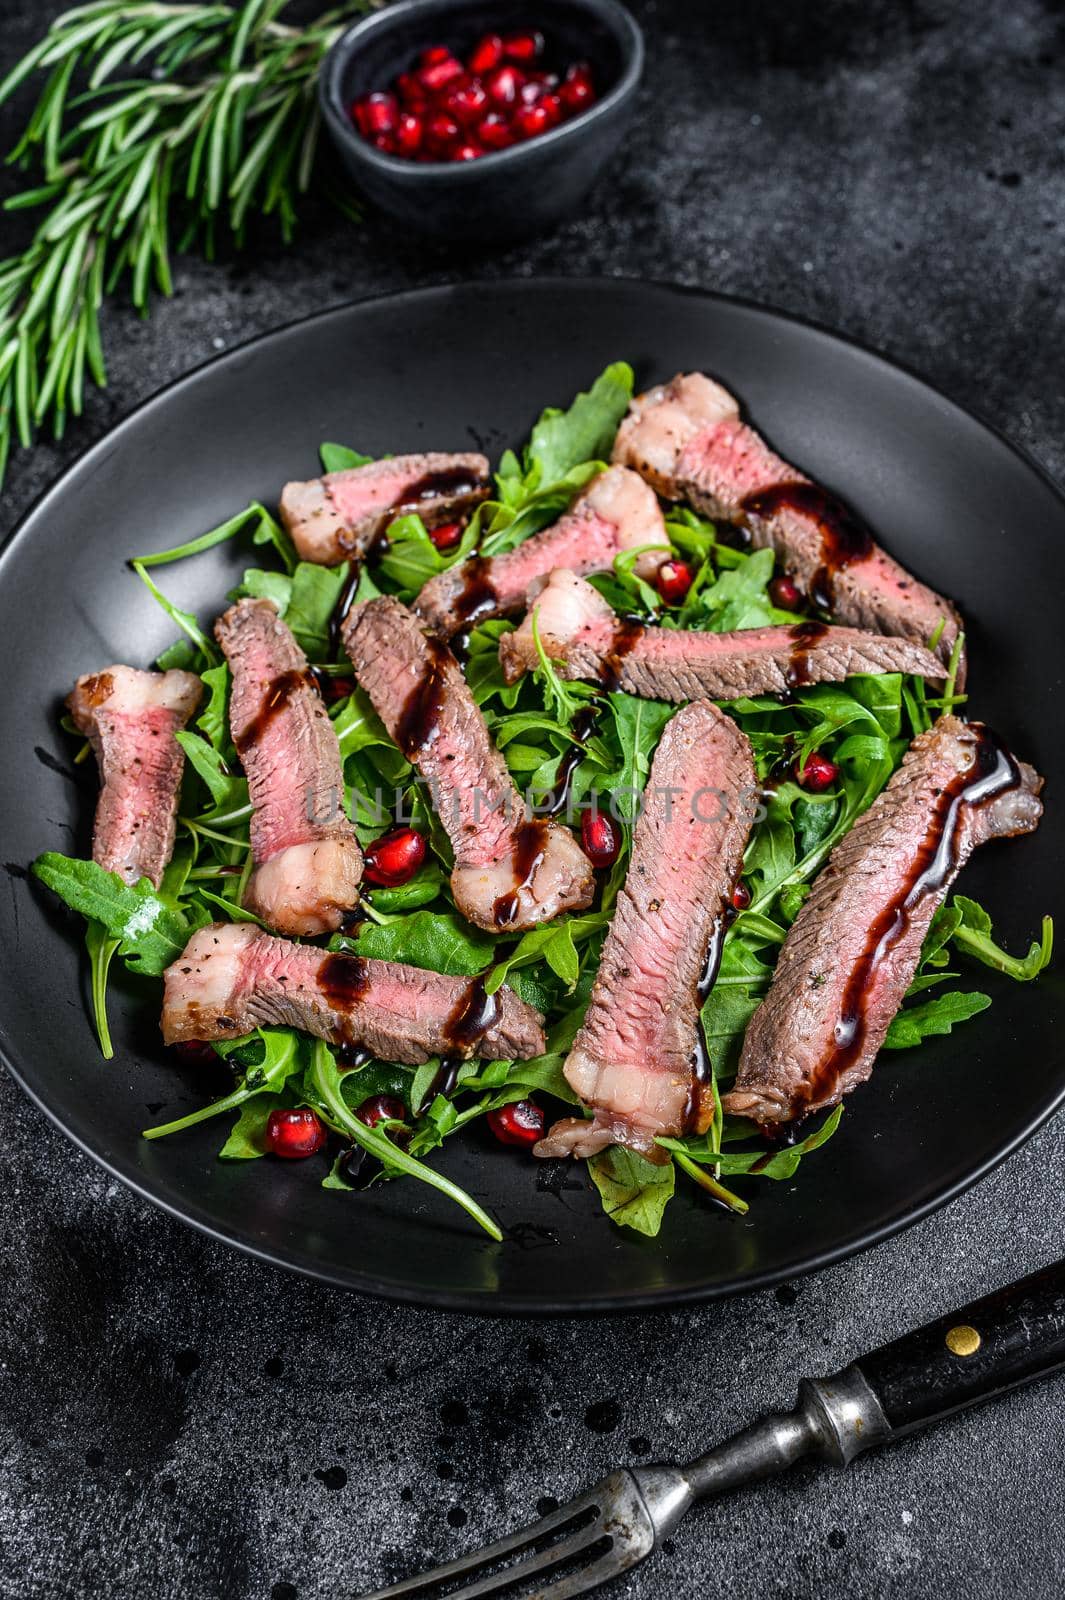 Grilled Beef Steak salad with arugula, pomegranate and greens vegetables. Black background. Top view by Composter